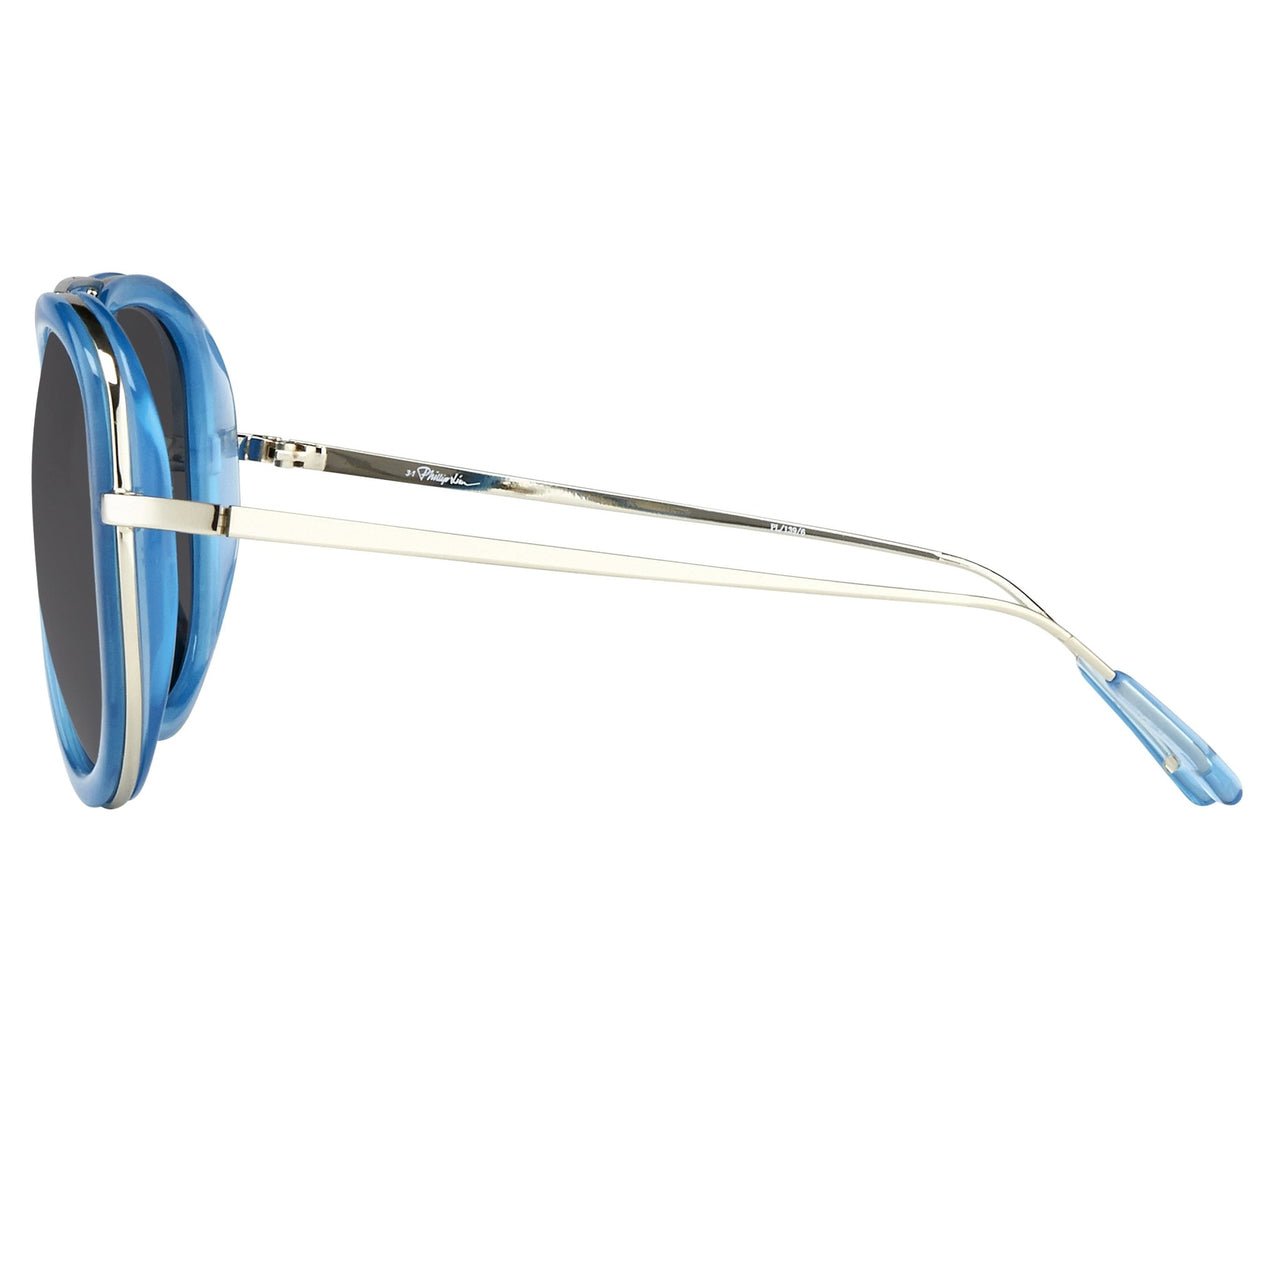 Phillip Lim Sunglasses Men's Aviator Turquoise Nickel with Dark Grey Lenses Category 3 - PL139C6SUN - Watches & Crystals